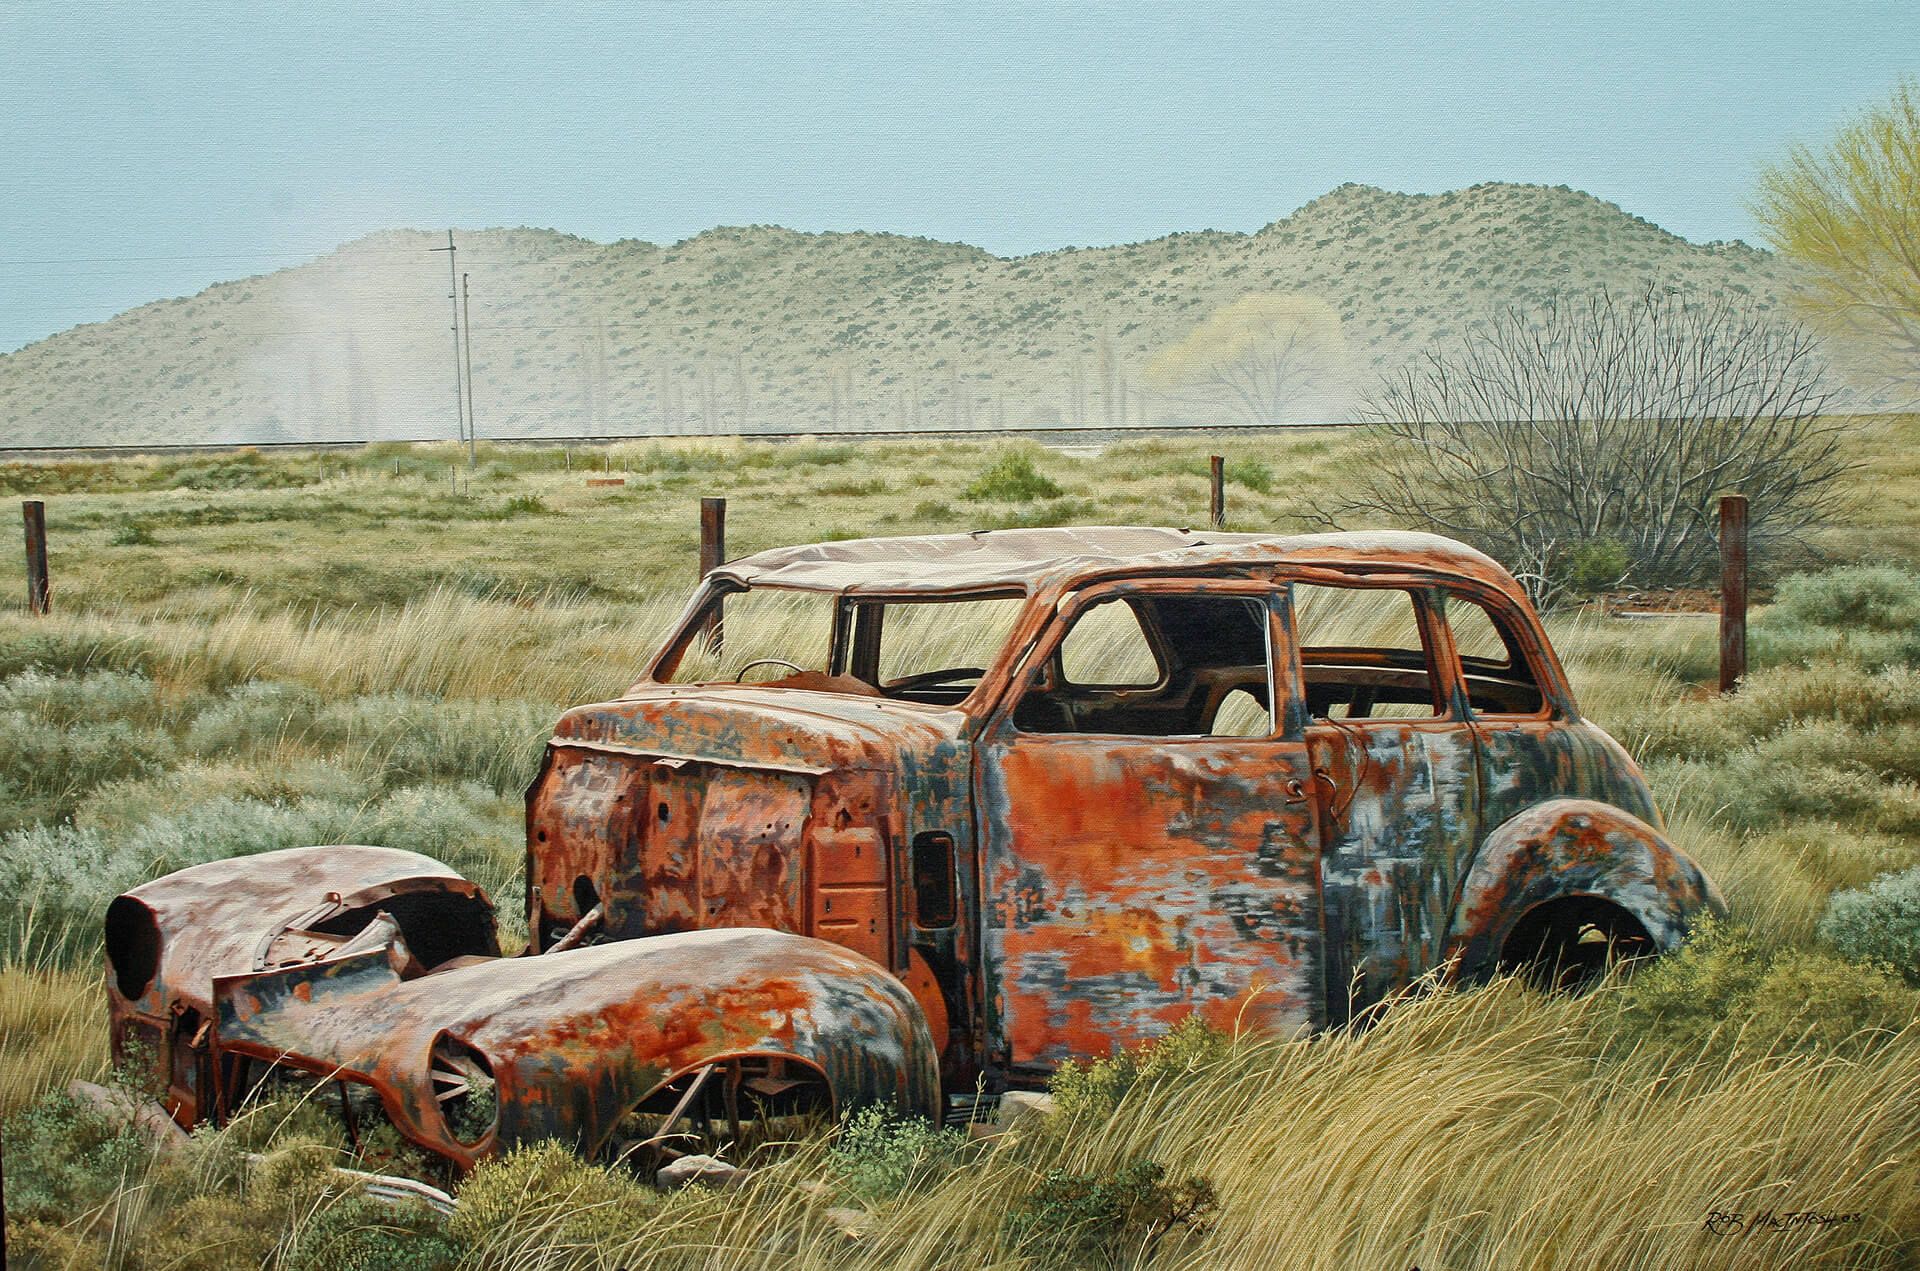 Photorealistic painting of a rusty and degraded car in an open field